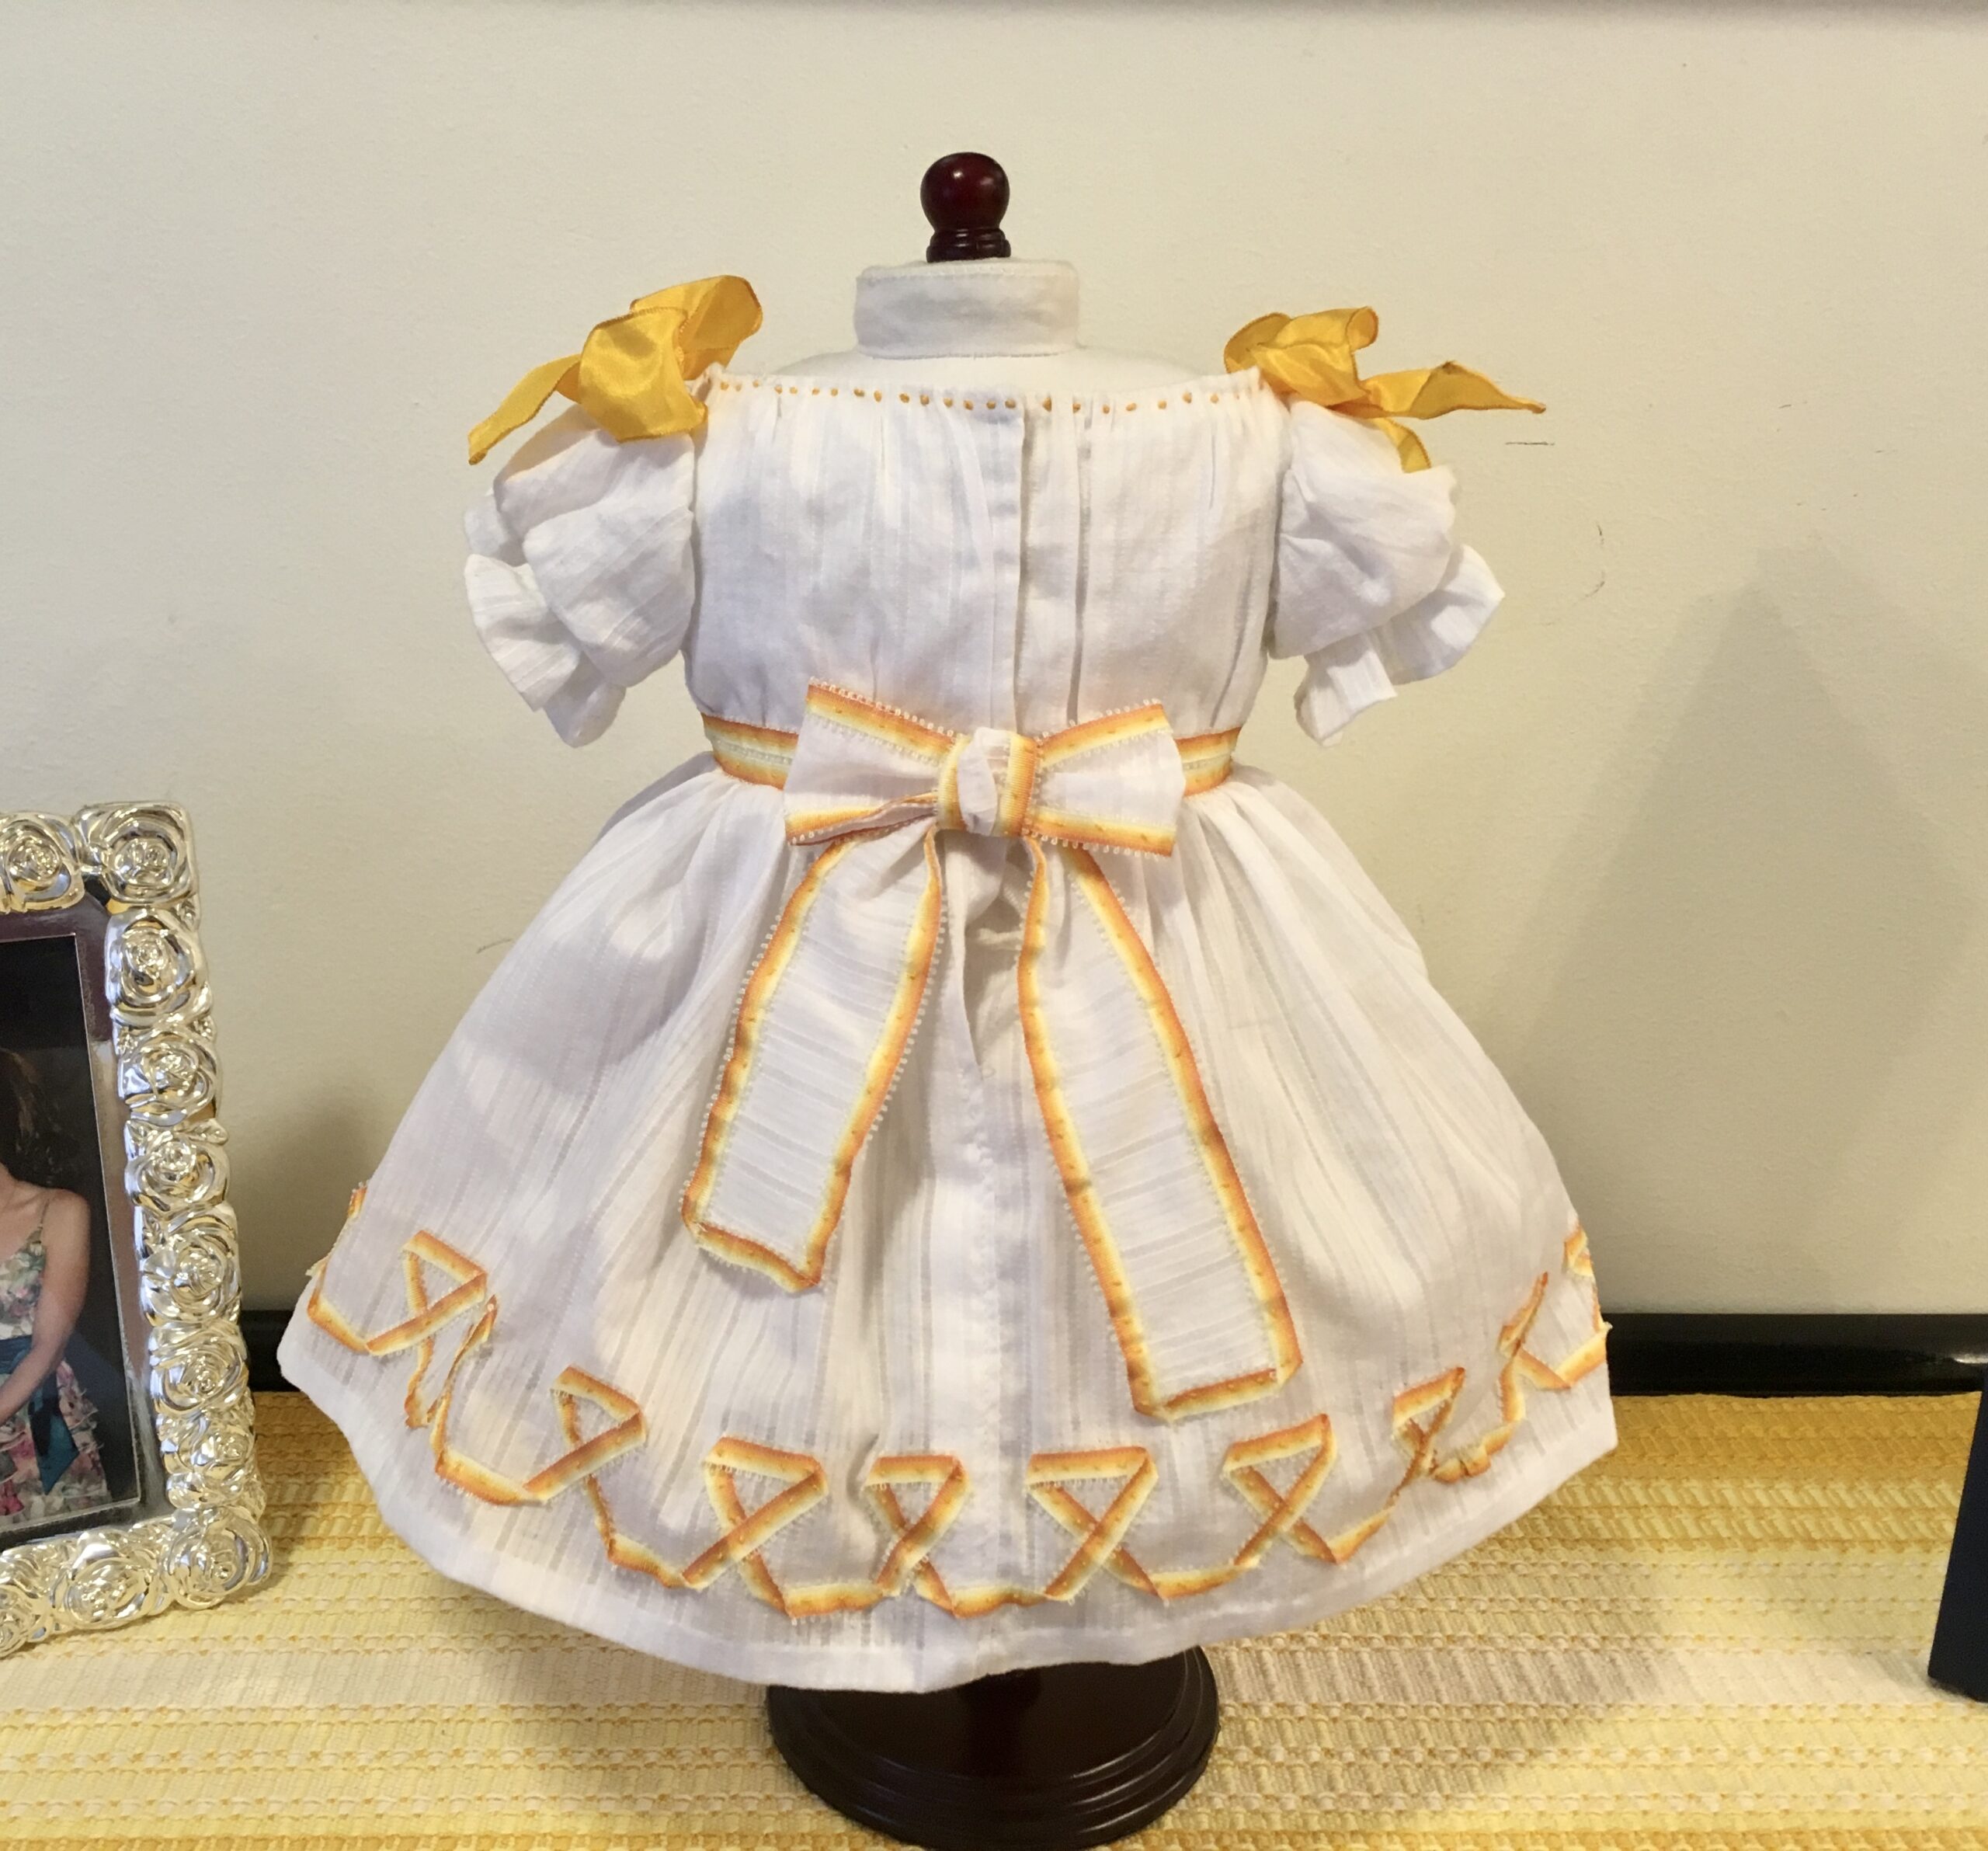 The front view of the Winterhalter princess dress - a white dress with a full skirt, gathered bodice front and puffed sleeves. There are yellow bows on the shoulders, yellow orange trimming on the skirt and a bow at the back waist.